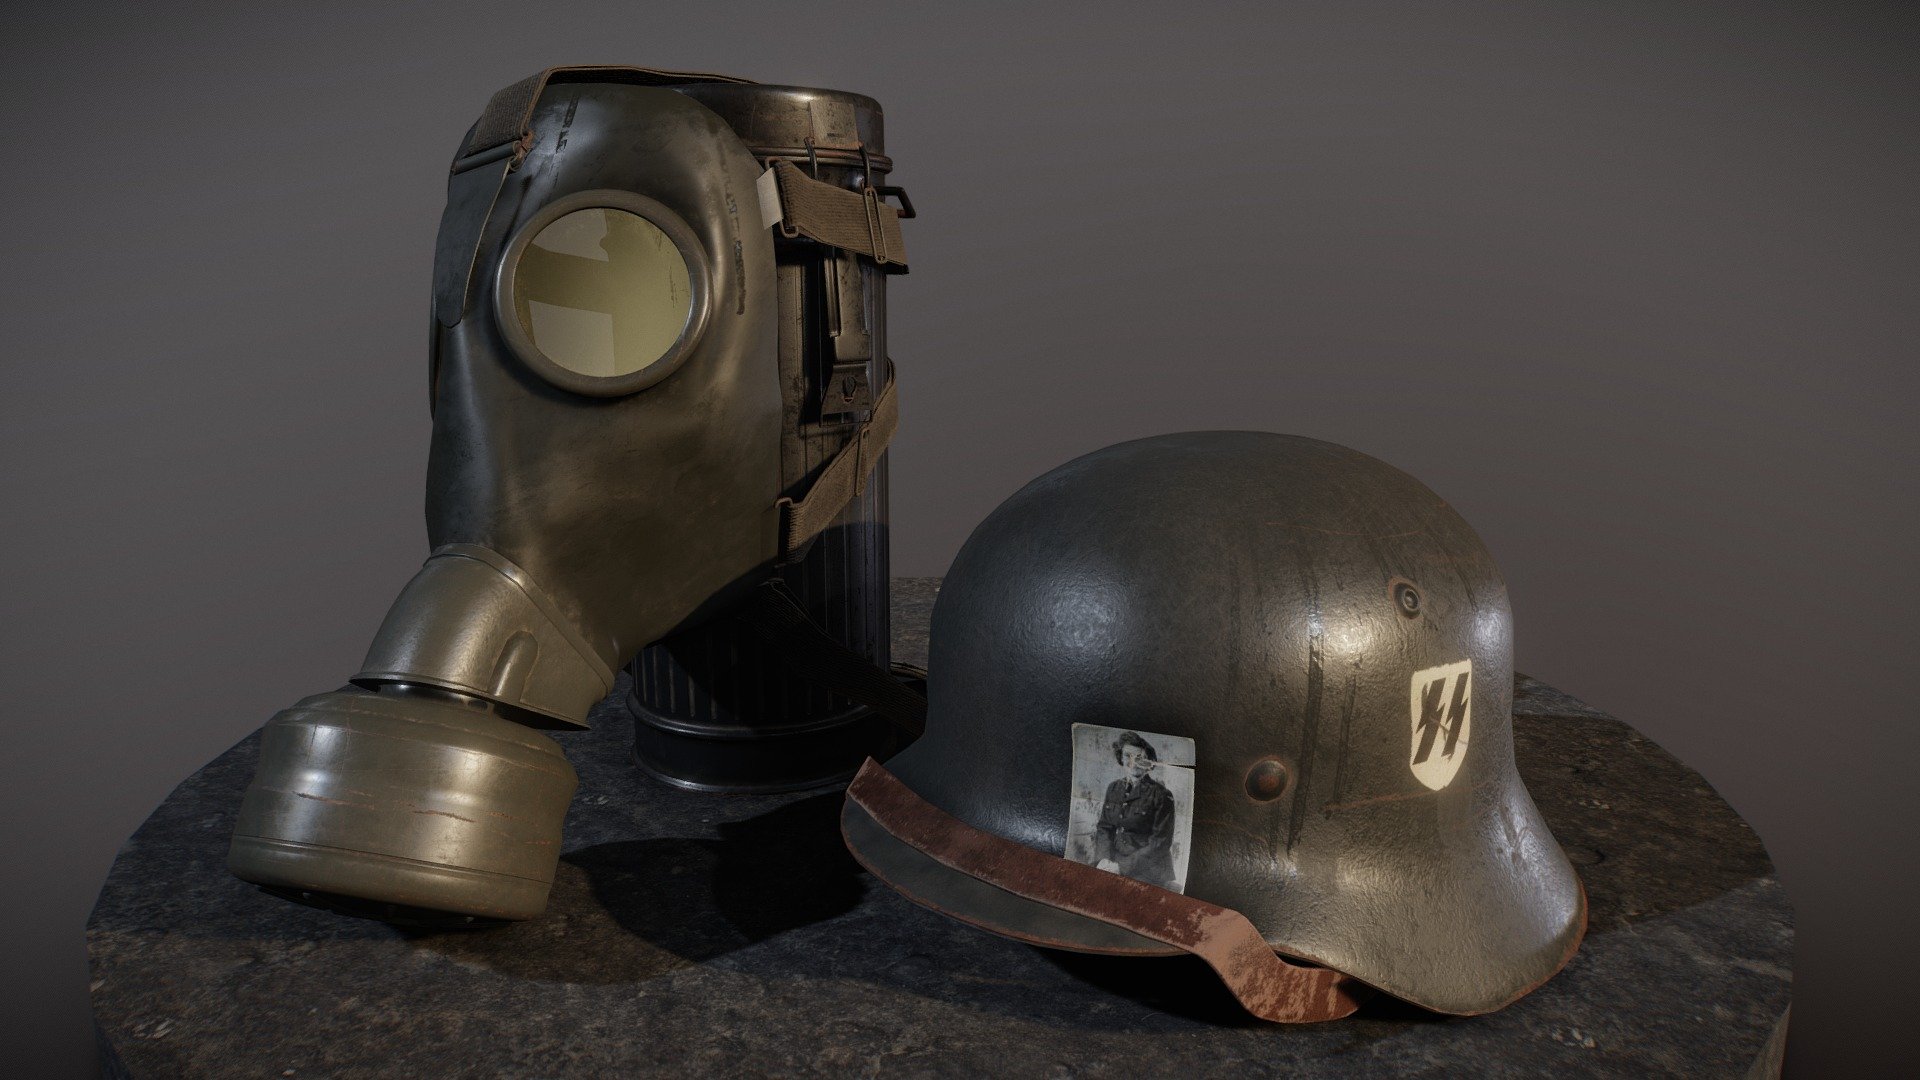 Modeling and baking done in 3Ds Max, texturing done in Photoshop using the PBR metalness workflow.

https://www.artstation.com/artwork/3bNRm - WWII German Helmet, Gasmask and Canister - Download Free 3D model by Szabolcs Csizmadia (@Szalage) 3d model